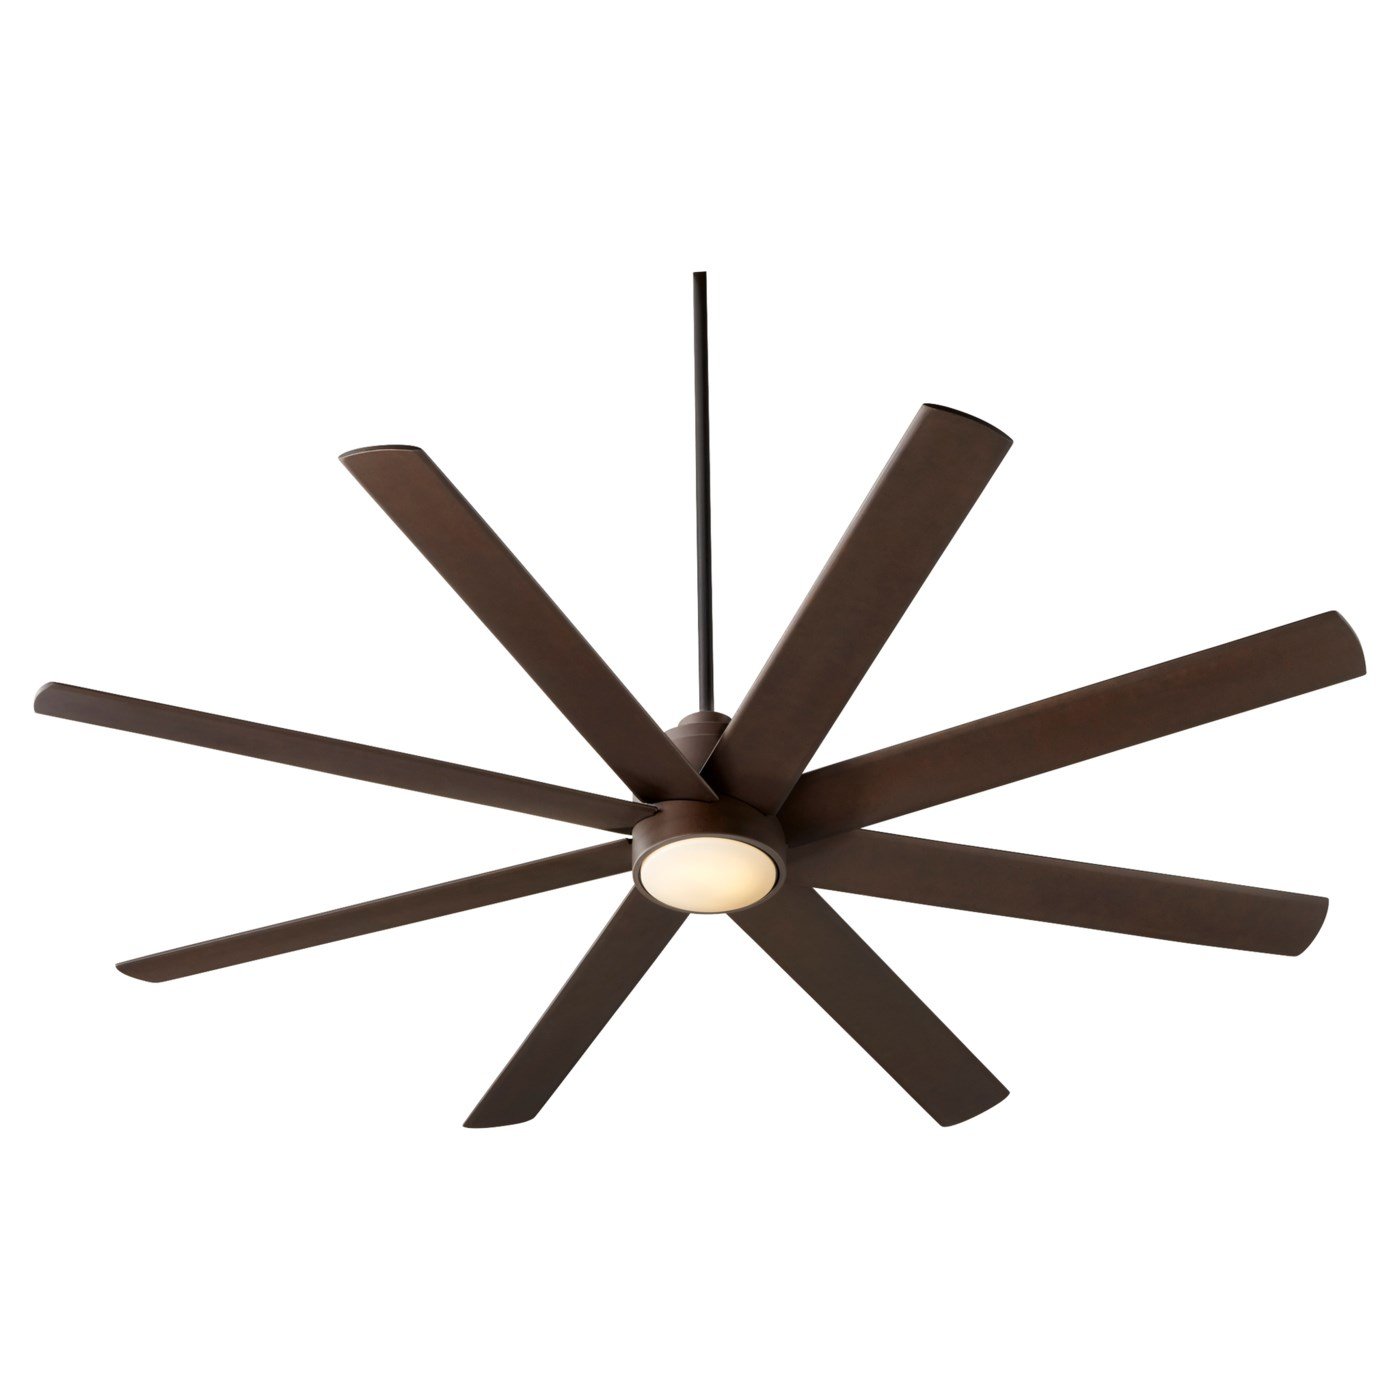 Oxygen Lighting 3-100-22 Cosmo Ceiling Fan 70 inch 8 Blades - Oiled Bronze